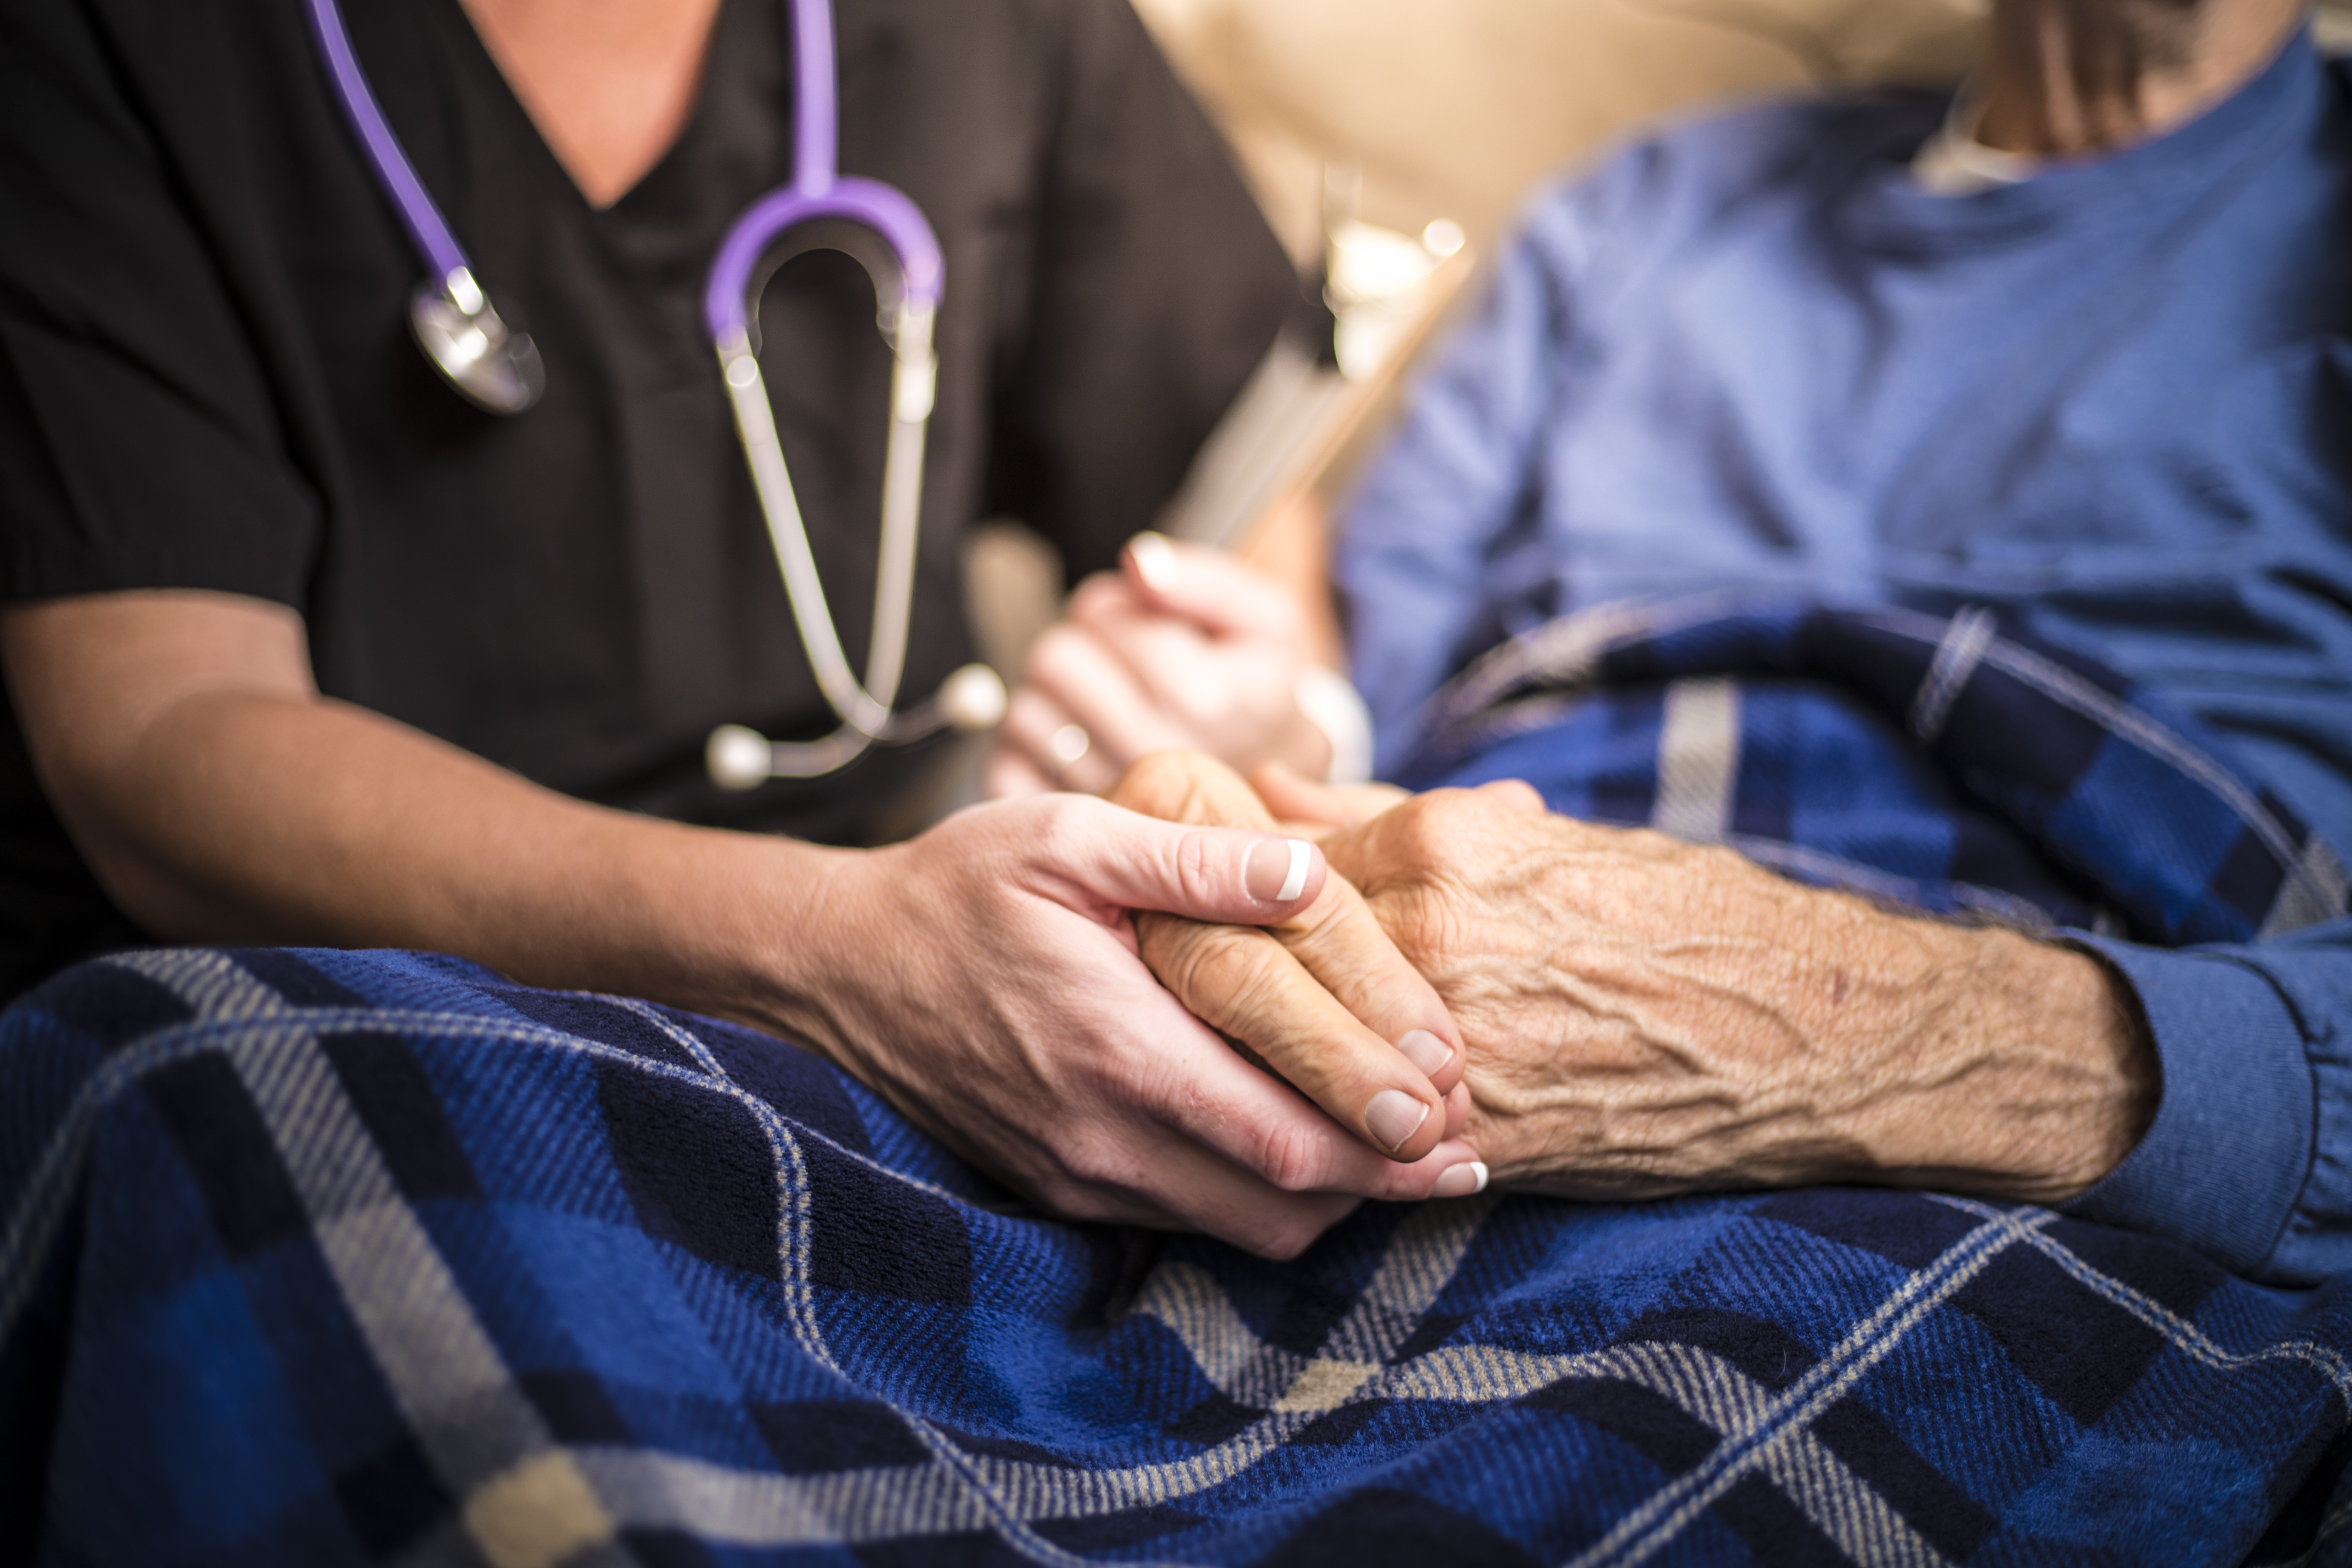 Over 1,600 Nursing Homes in the United States are Short-Staffed, and Their Medicare Ratings Are Dropping Because of It